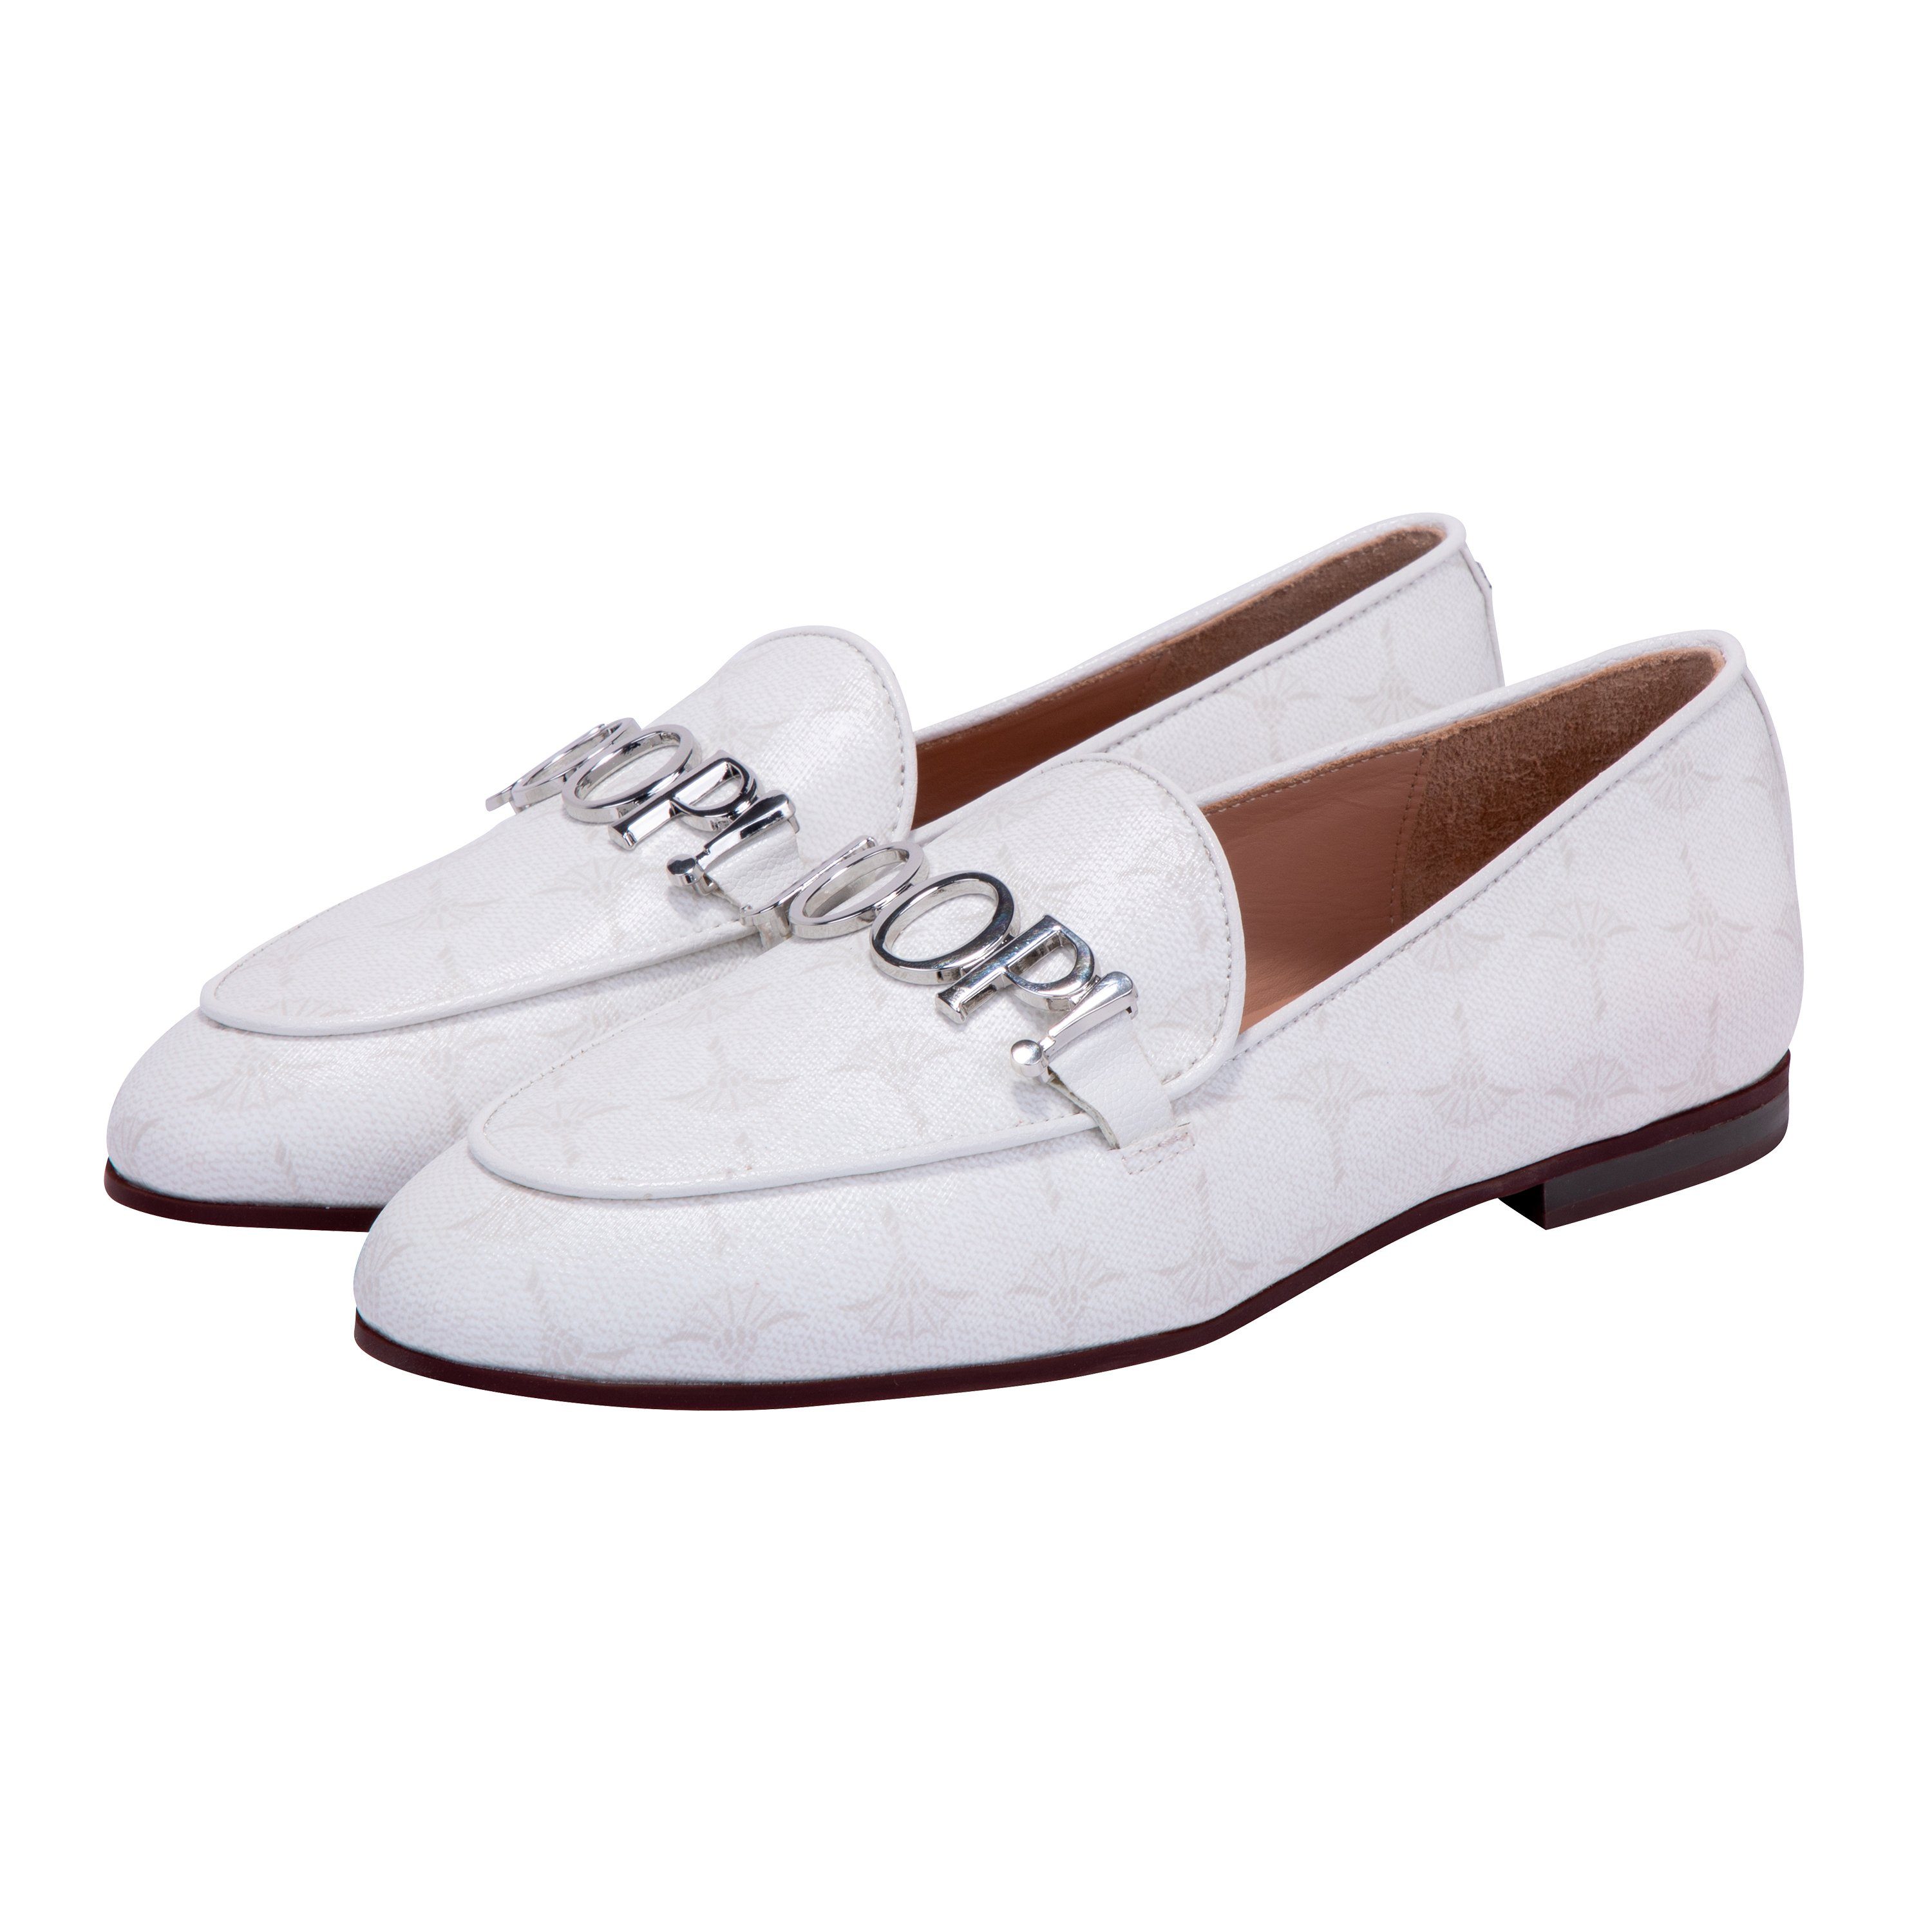 Joop! Slipper synthetic, outer: microfibre inner: offwhite